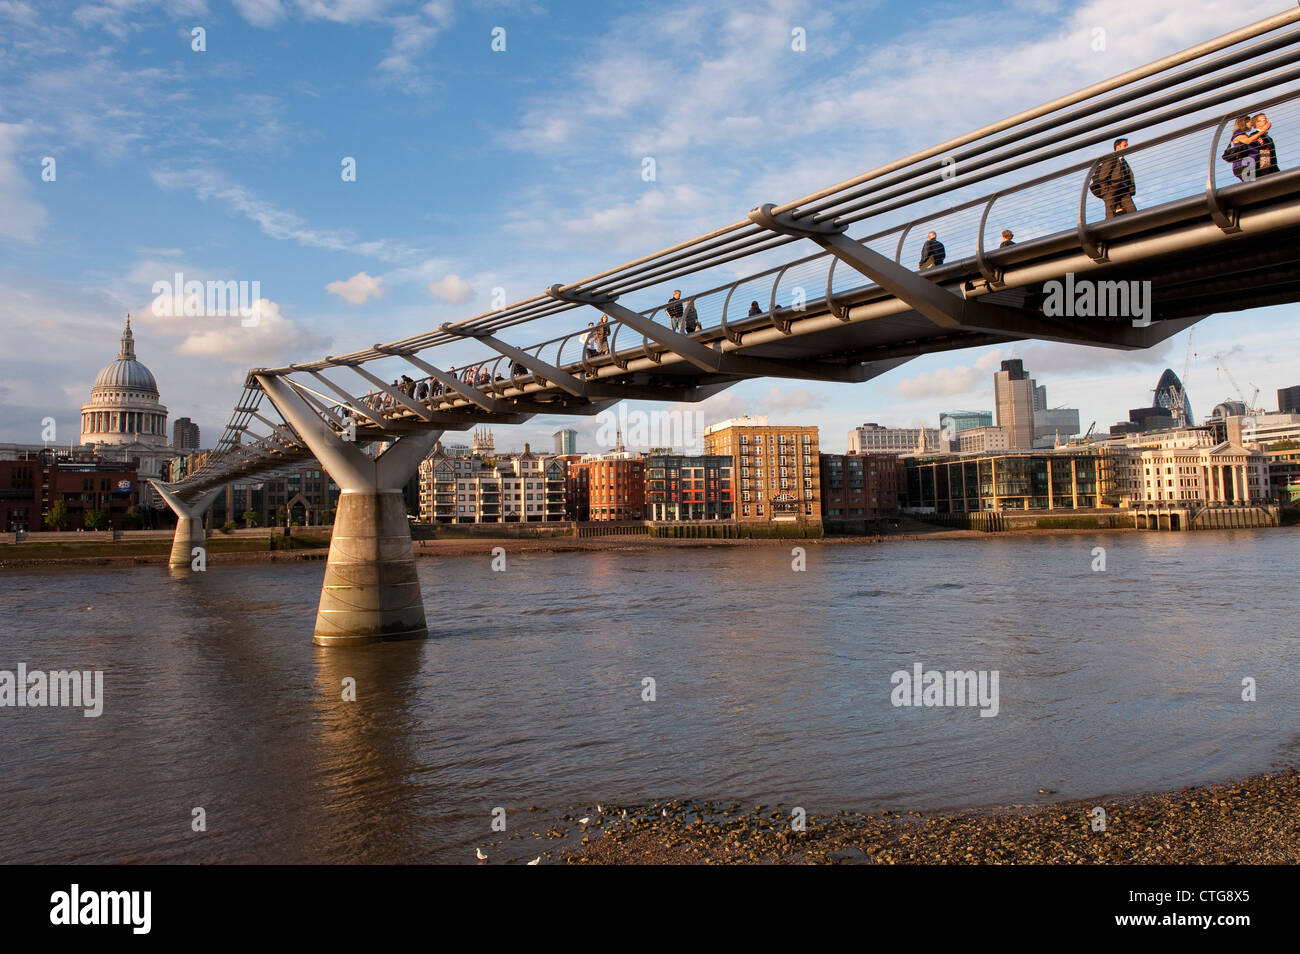 The London Millennium Footbridge, spanning the River Thames in the City of London, England. Stock Photo